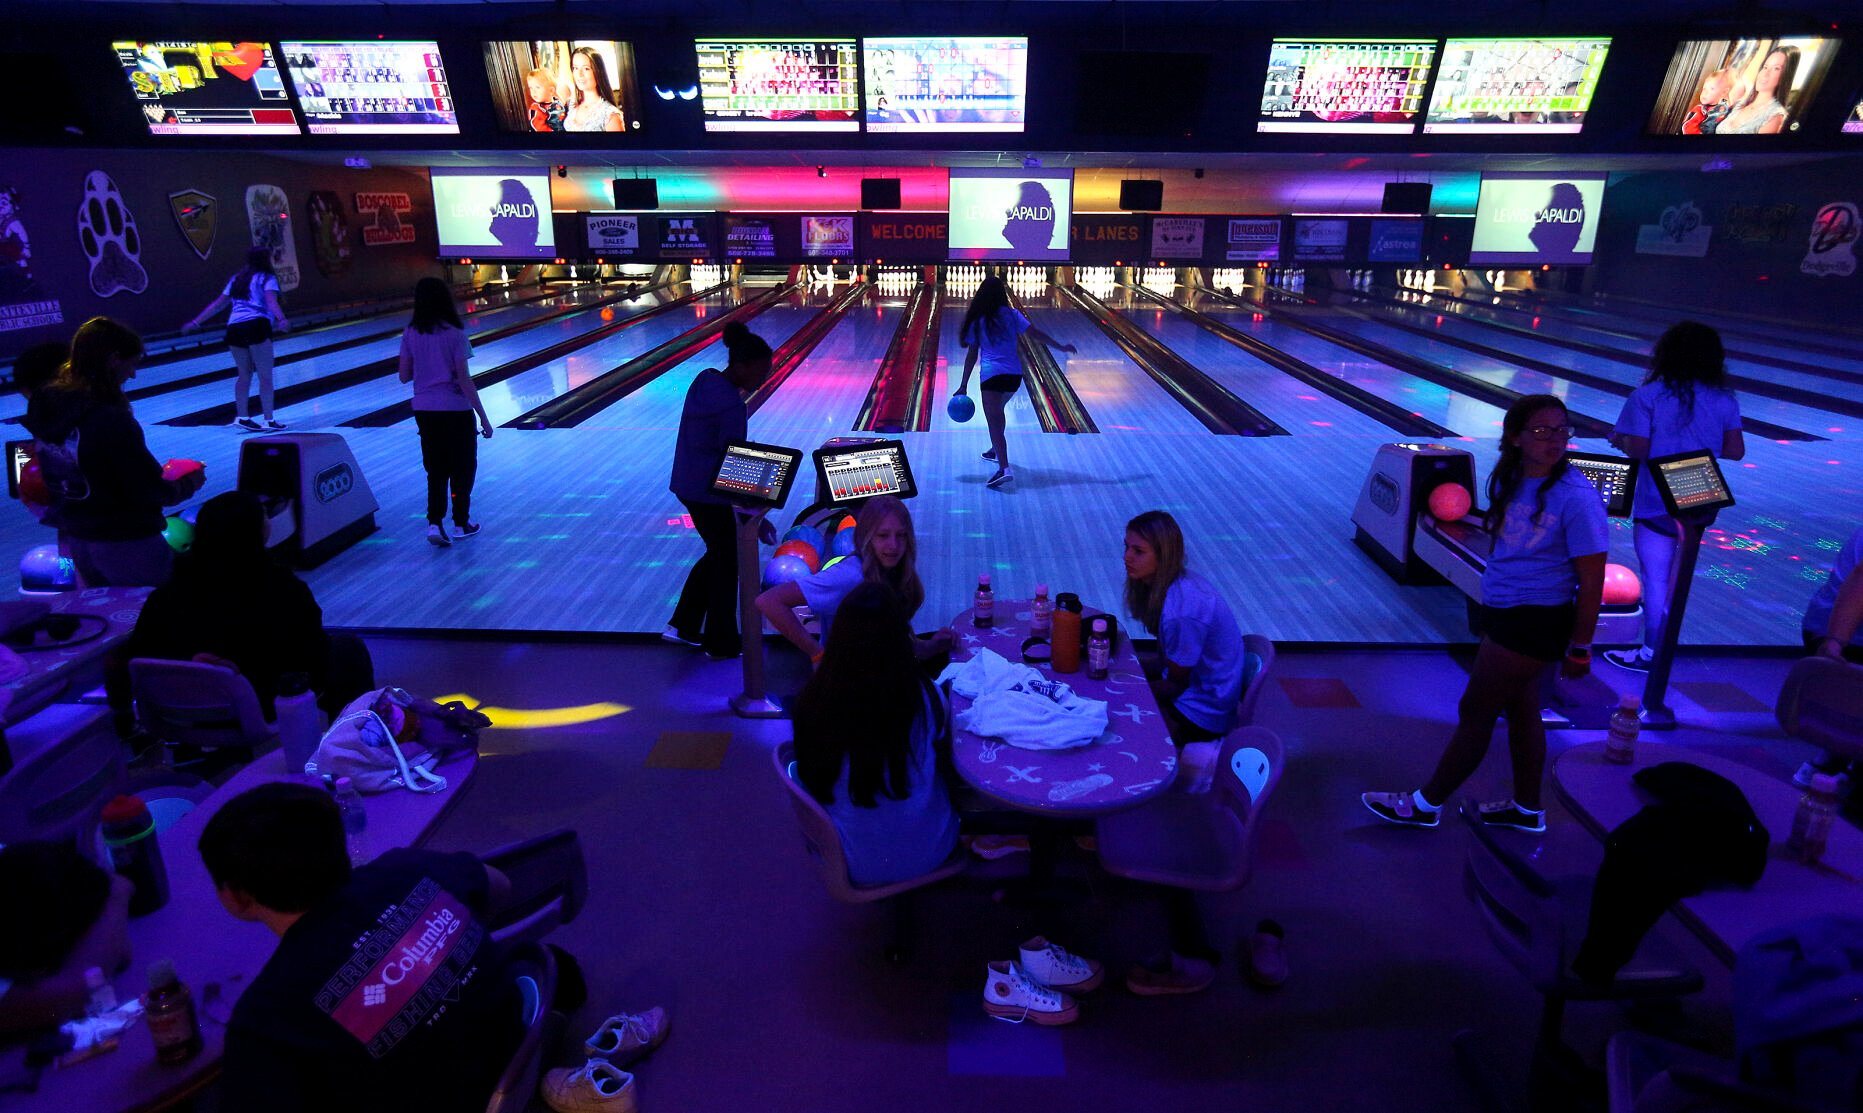 Galena Middle School students take part in cosmic bowling at Pioneer Lanes in Platteville, Wis., recently. While league bowling remains prevalent at area lanes, owners of longtime, locally owned bowling alleys have increased efforts to attract casual bowlers to help boost business as industry pressures strain alleys nationwide.    PHOTO CREDIT: Dave Kettering
Telegraph Herald